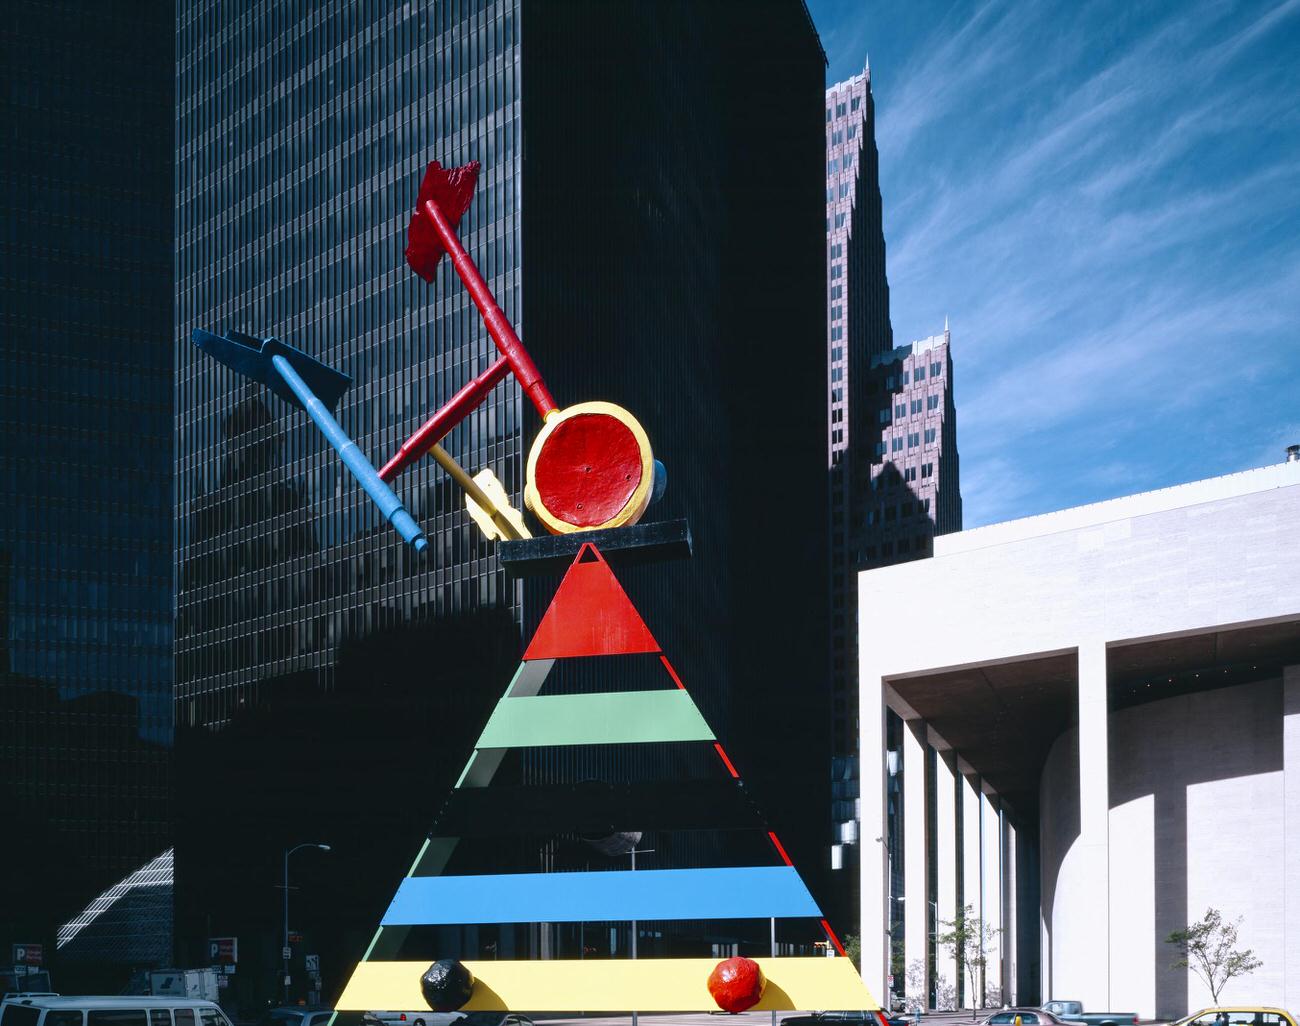 Joan Miro's sculpture 'Personage and Birds' in Houston, Texas, 1990s